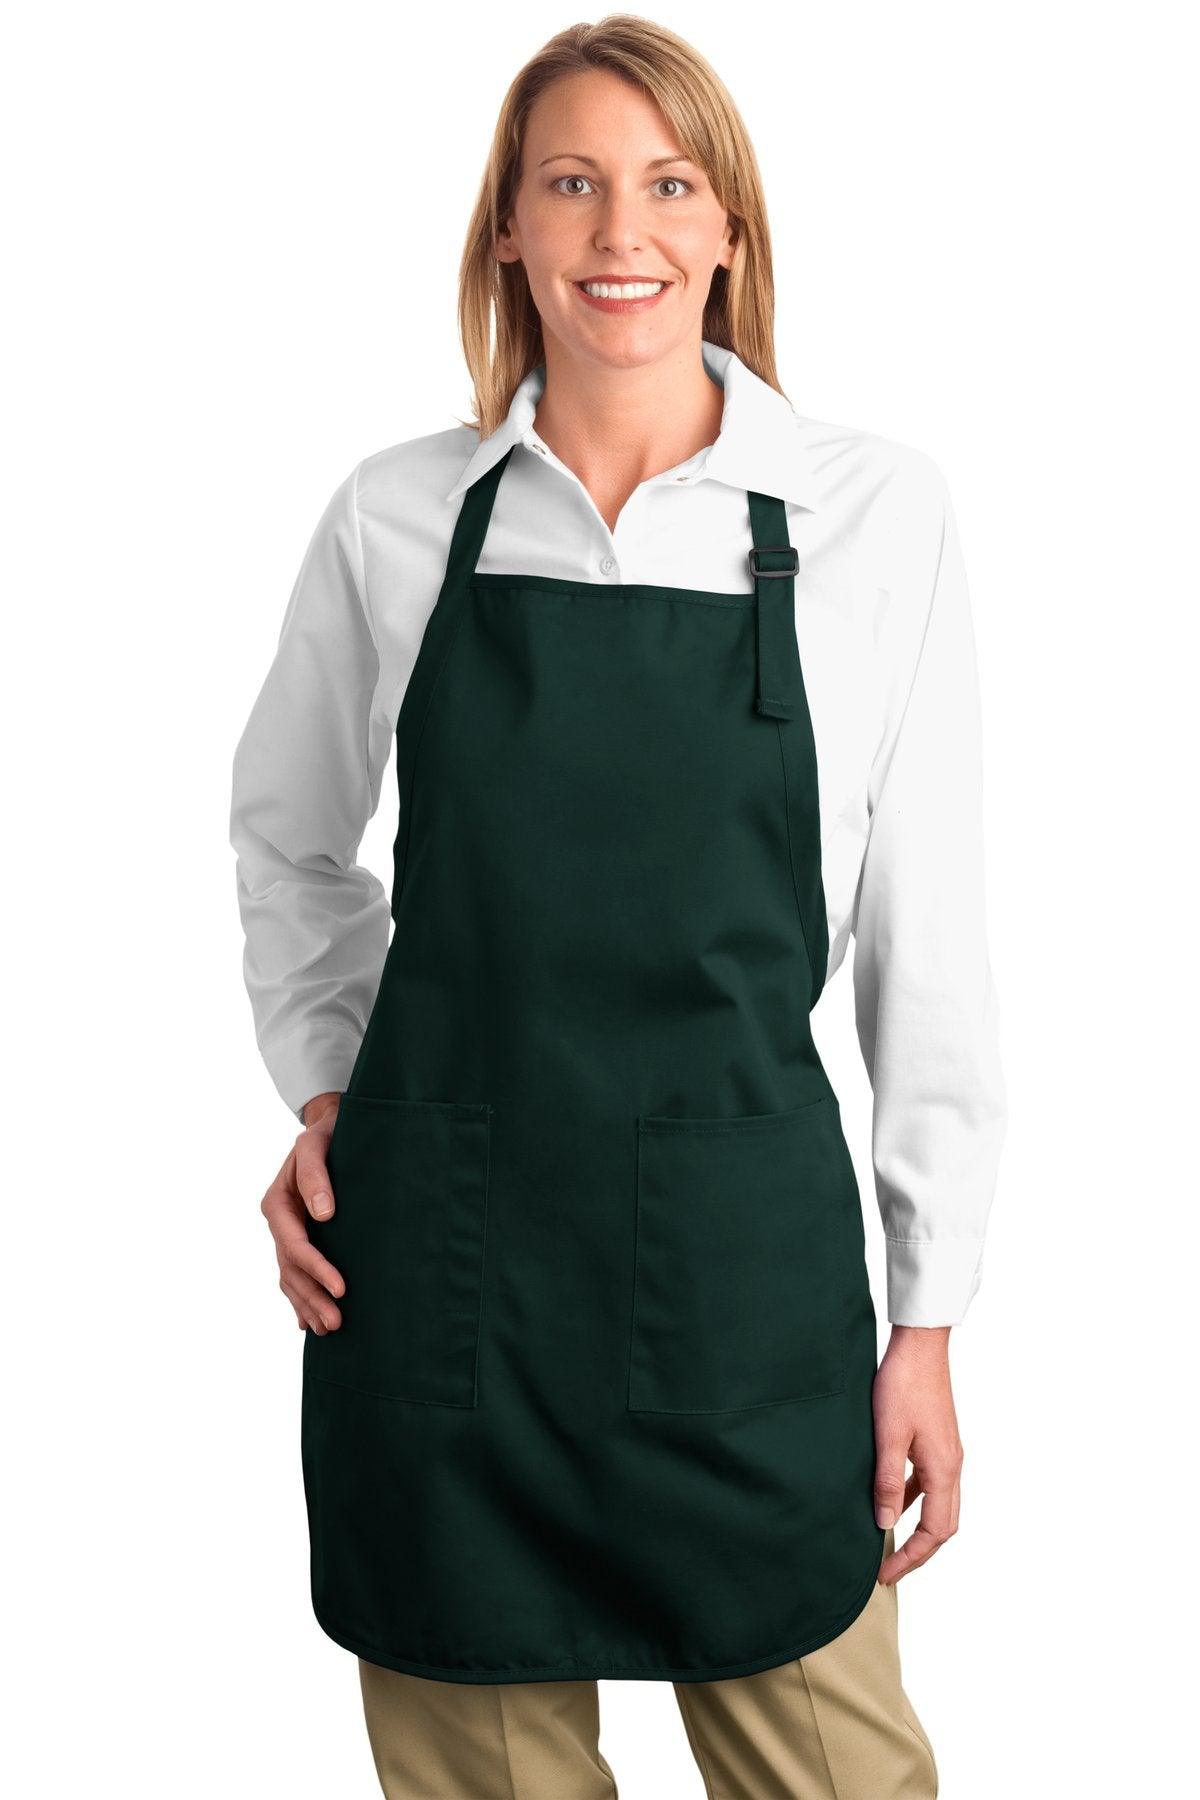 Port Authority Full-Length Apron with Pockets. A500 - Dresses Max